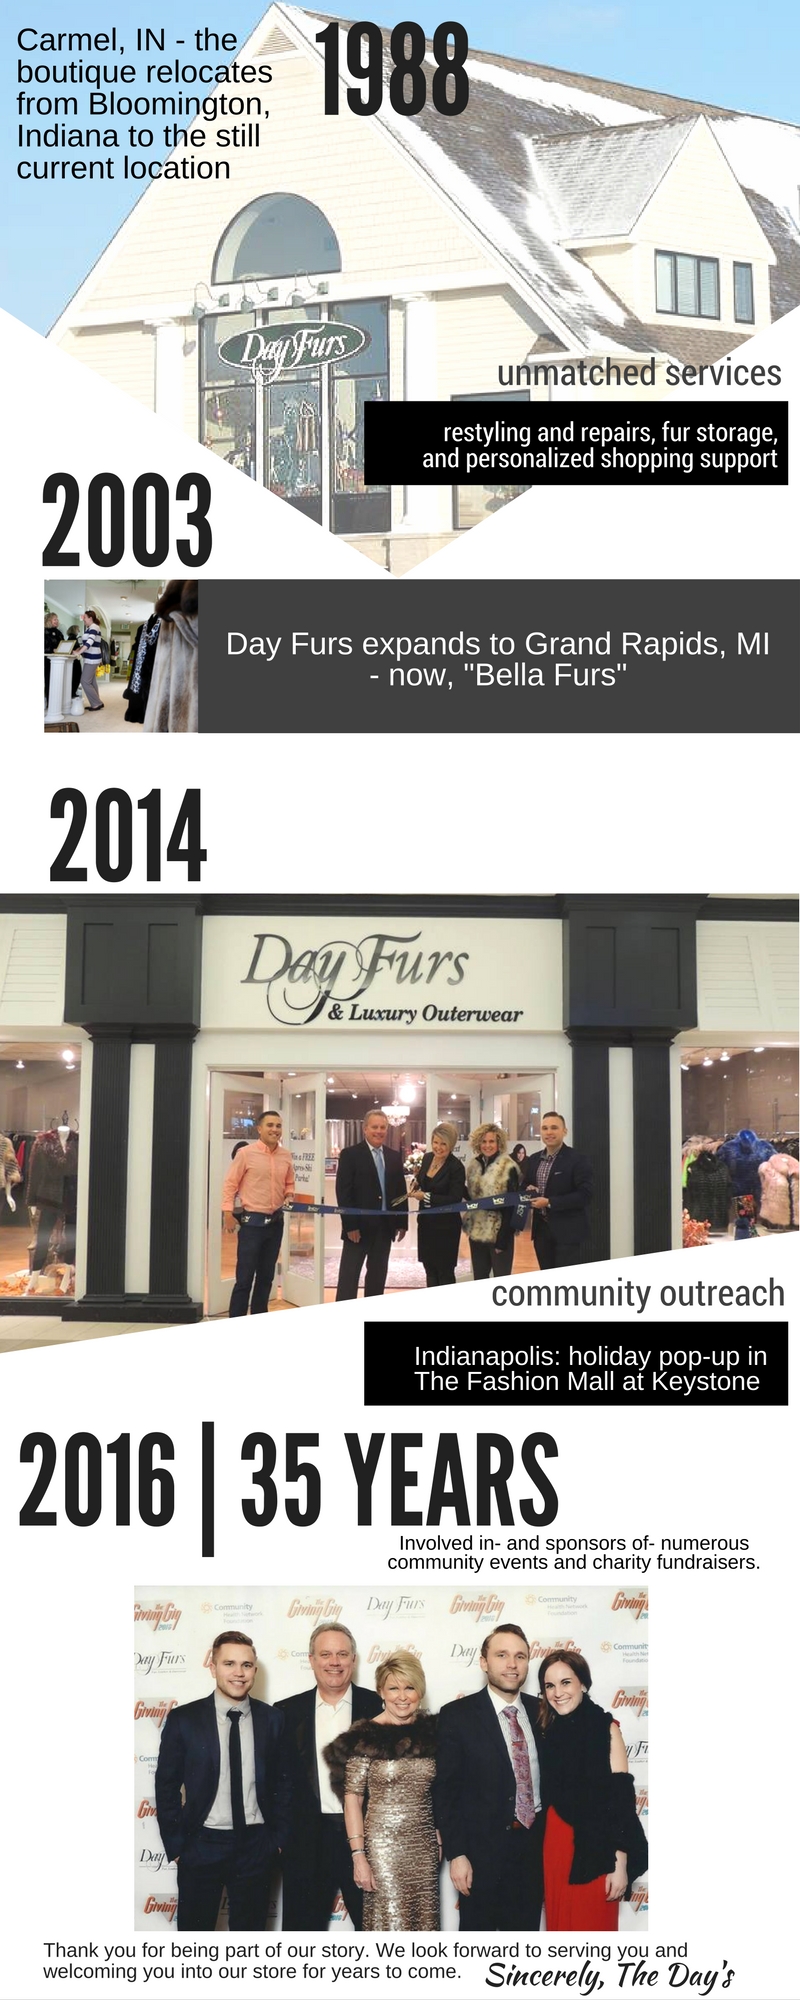 story-of-day-furs-2-family-brand-luxury-outerwear-carmel-indiana